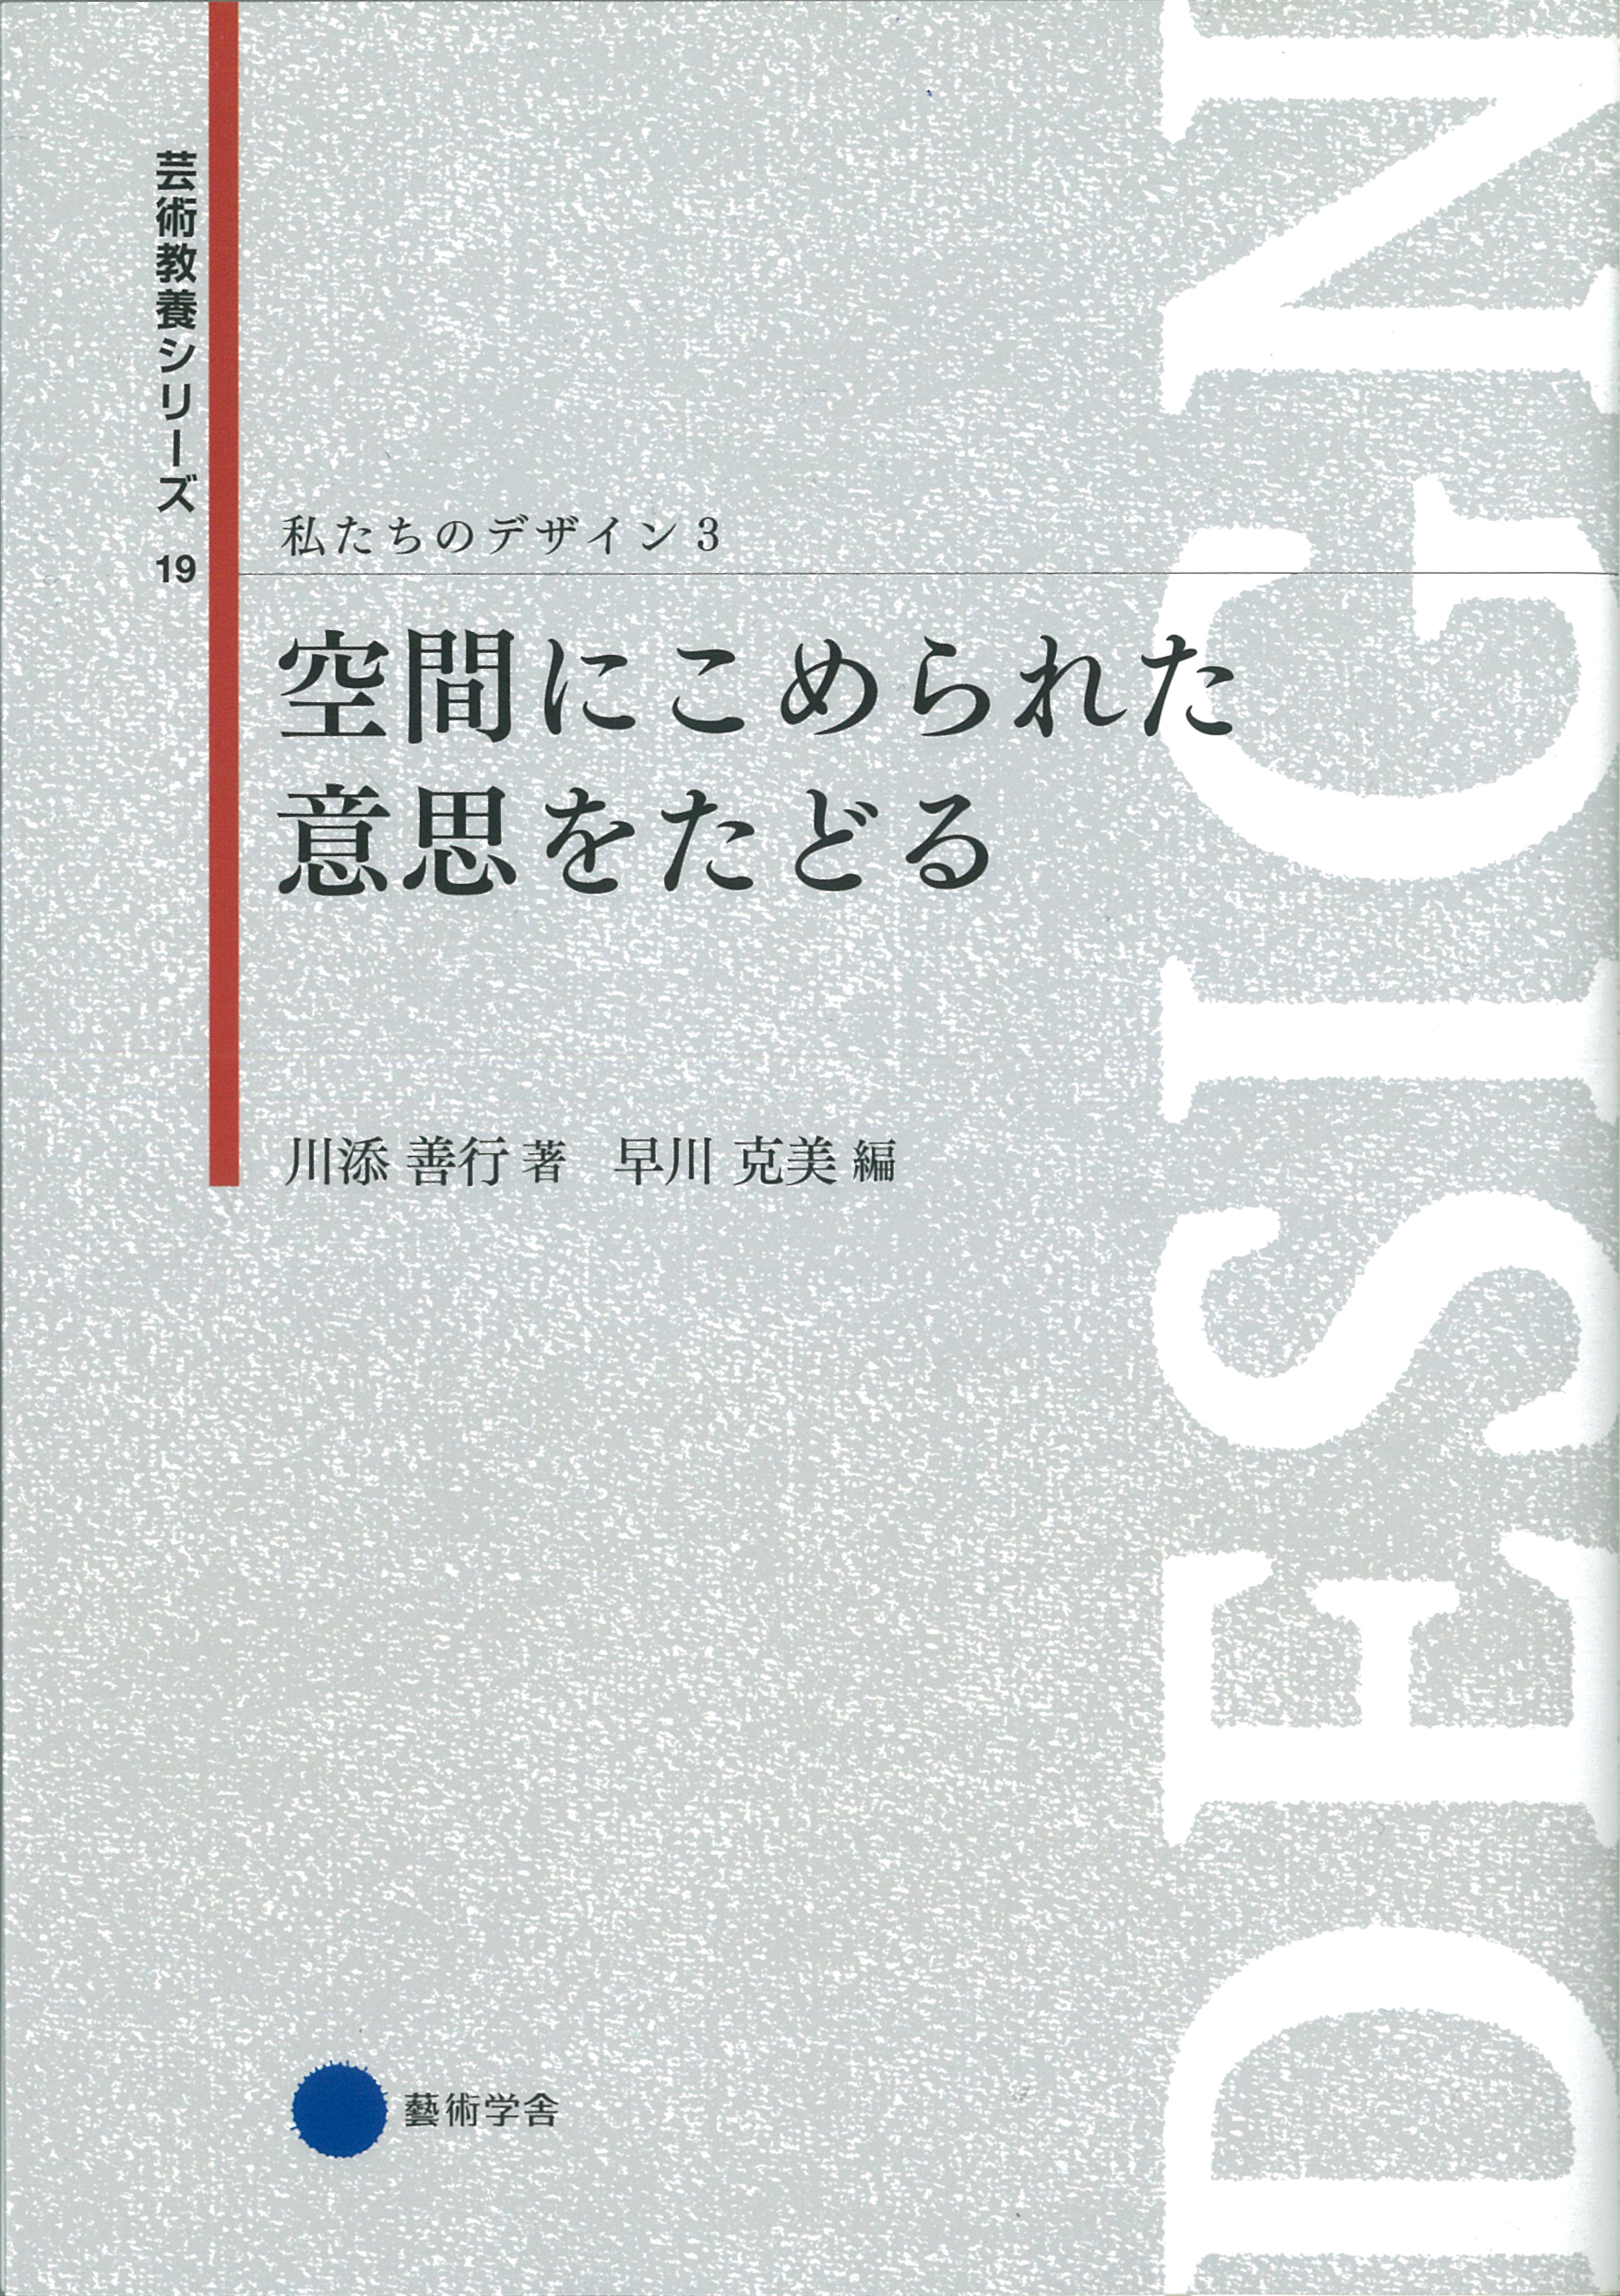 Light gray cover with typography title“DESIGN”